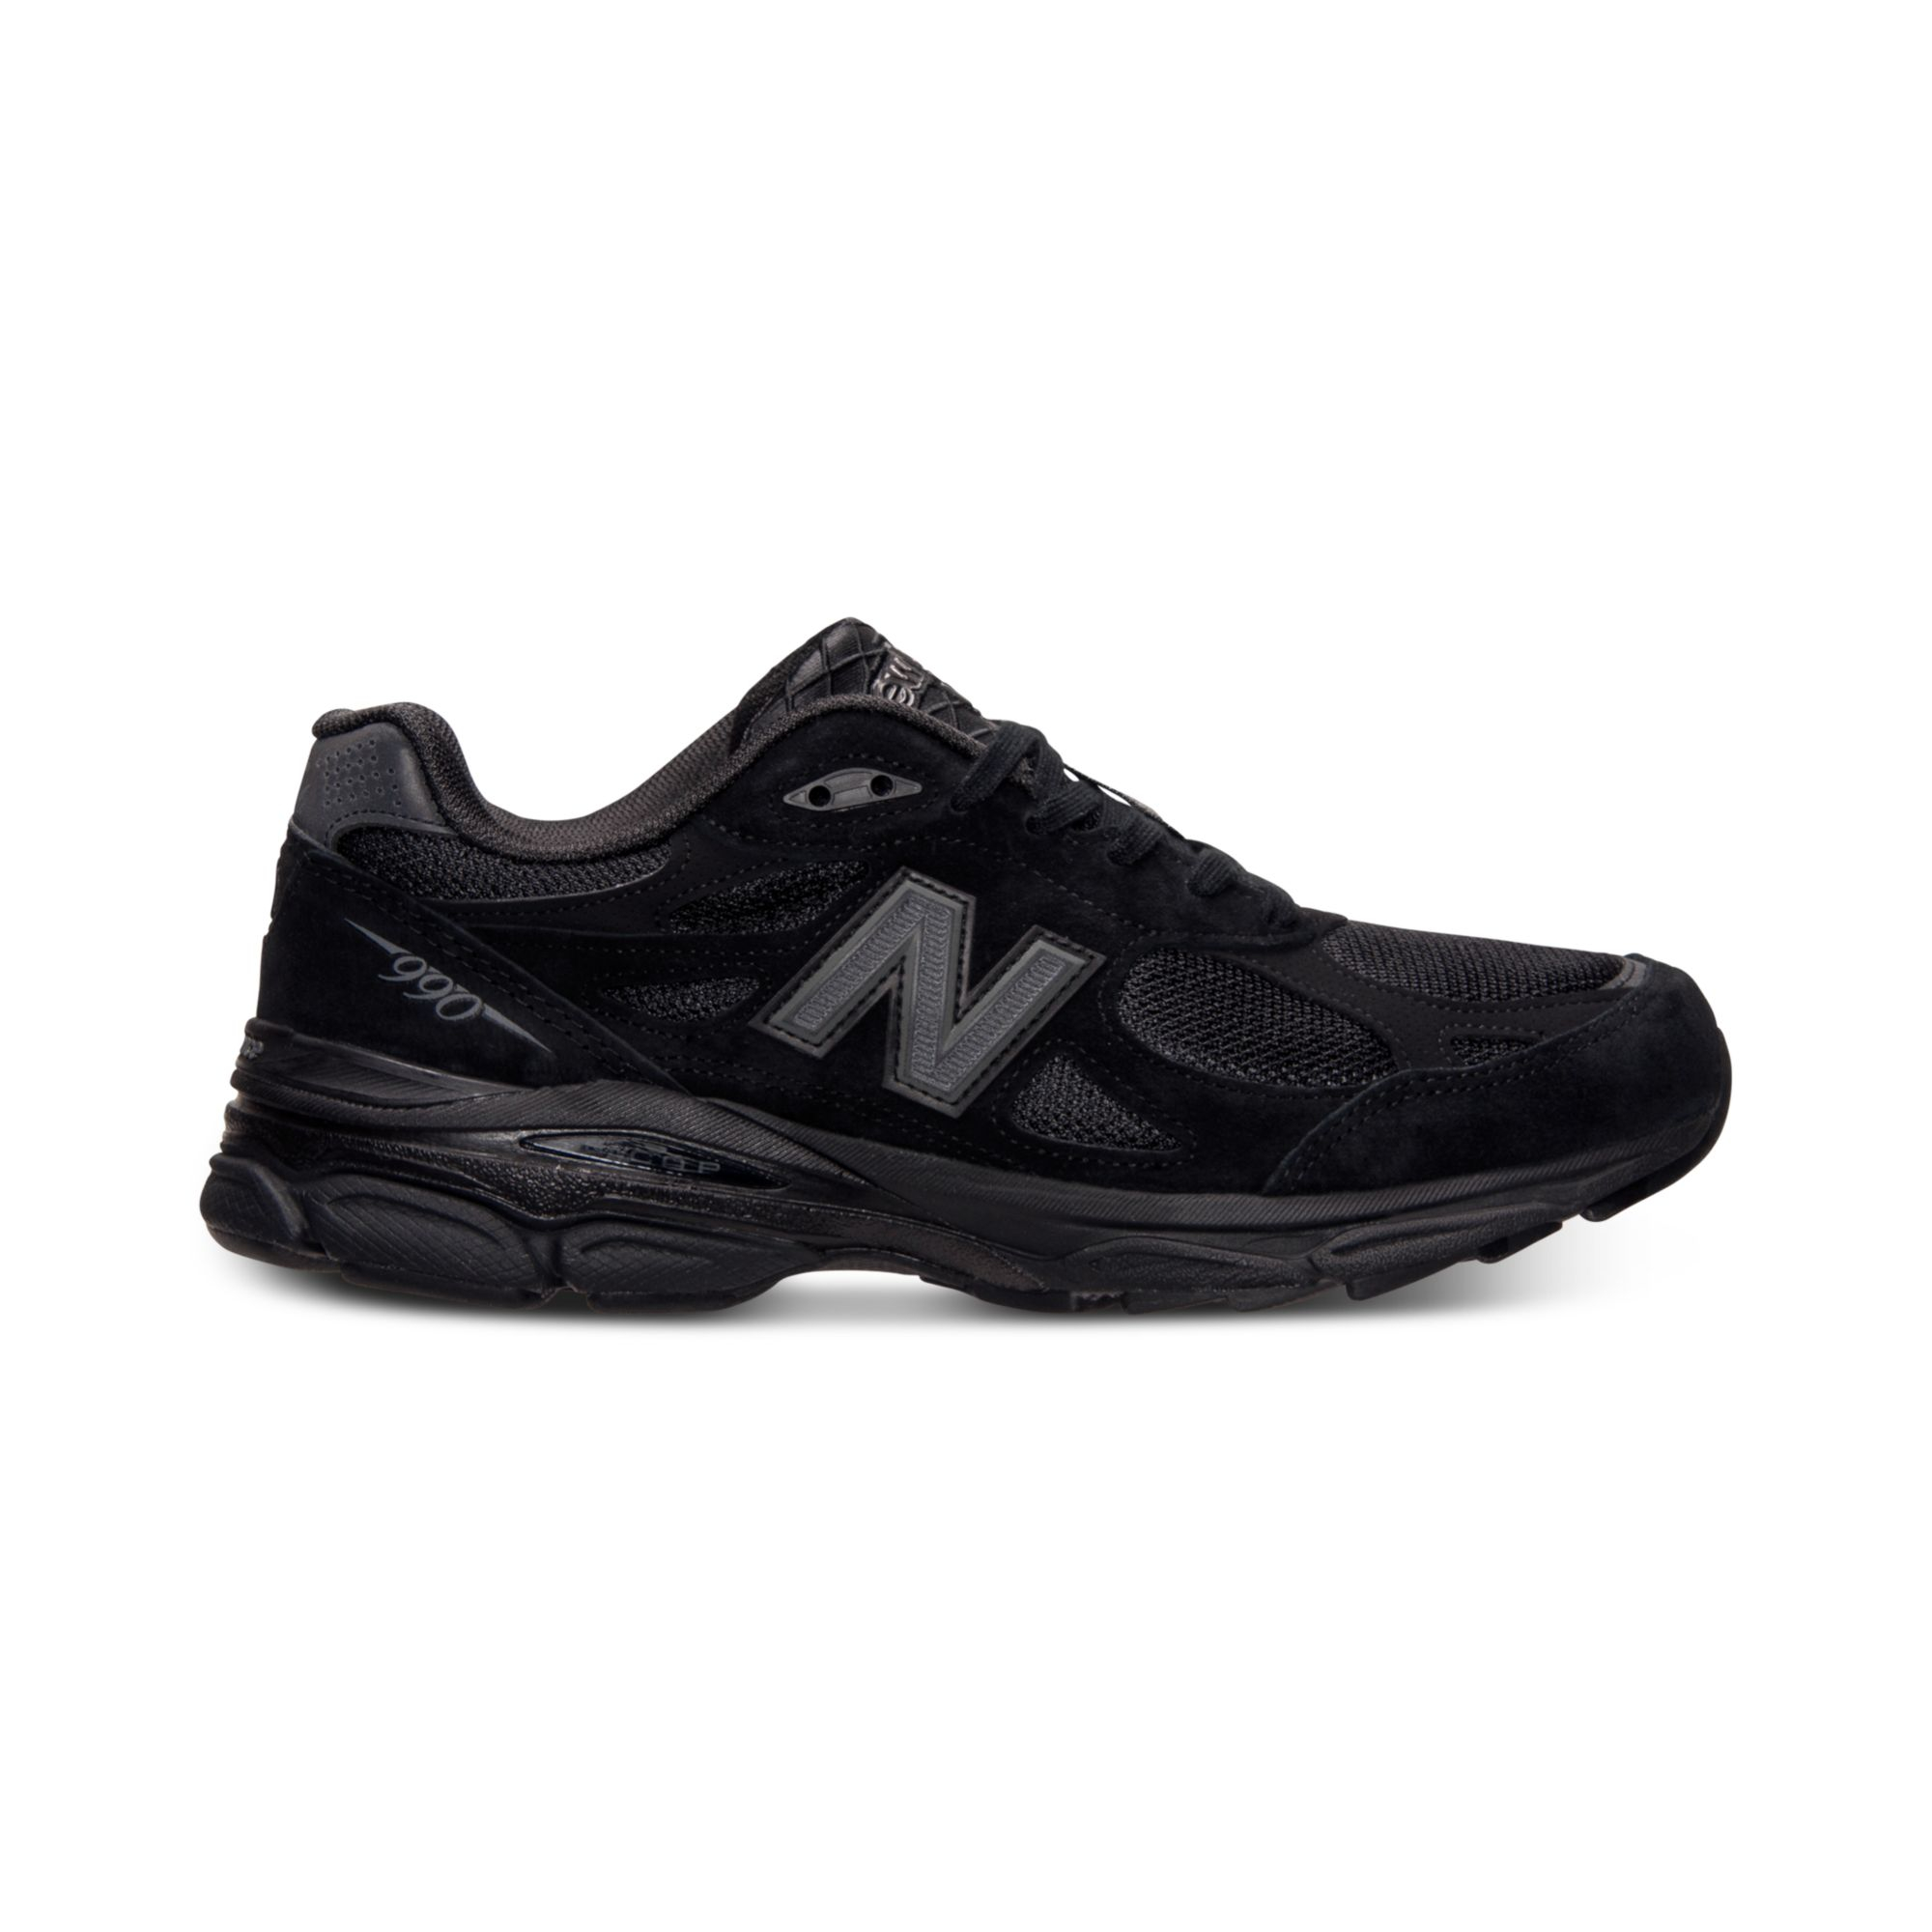 Lyst - New Balance Mens 990v3 Running Sneakers From Finish Line in ...